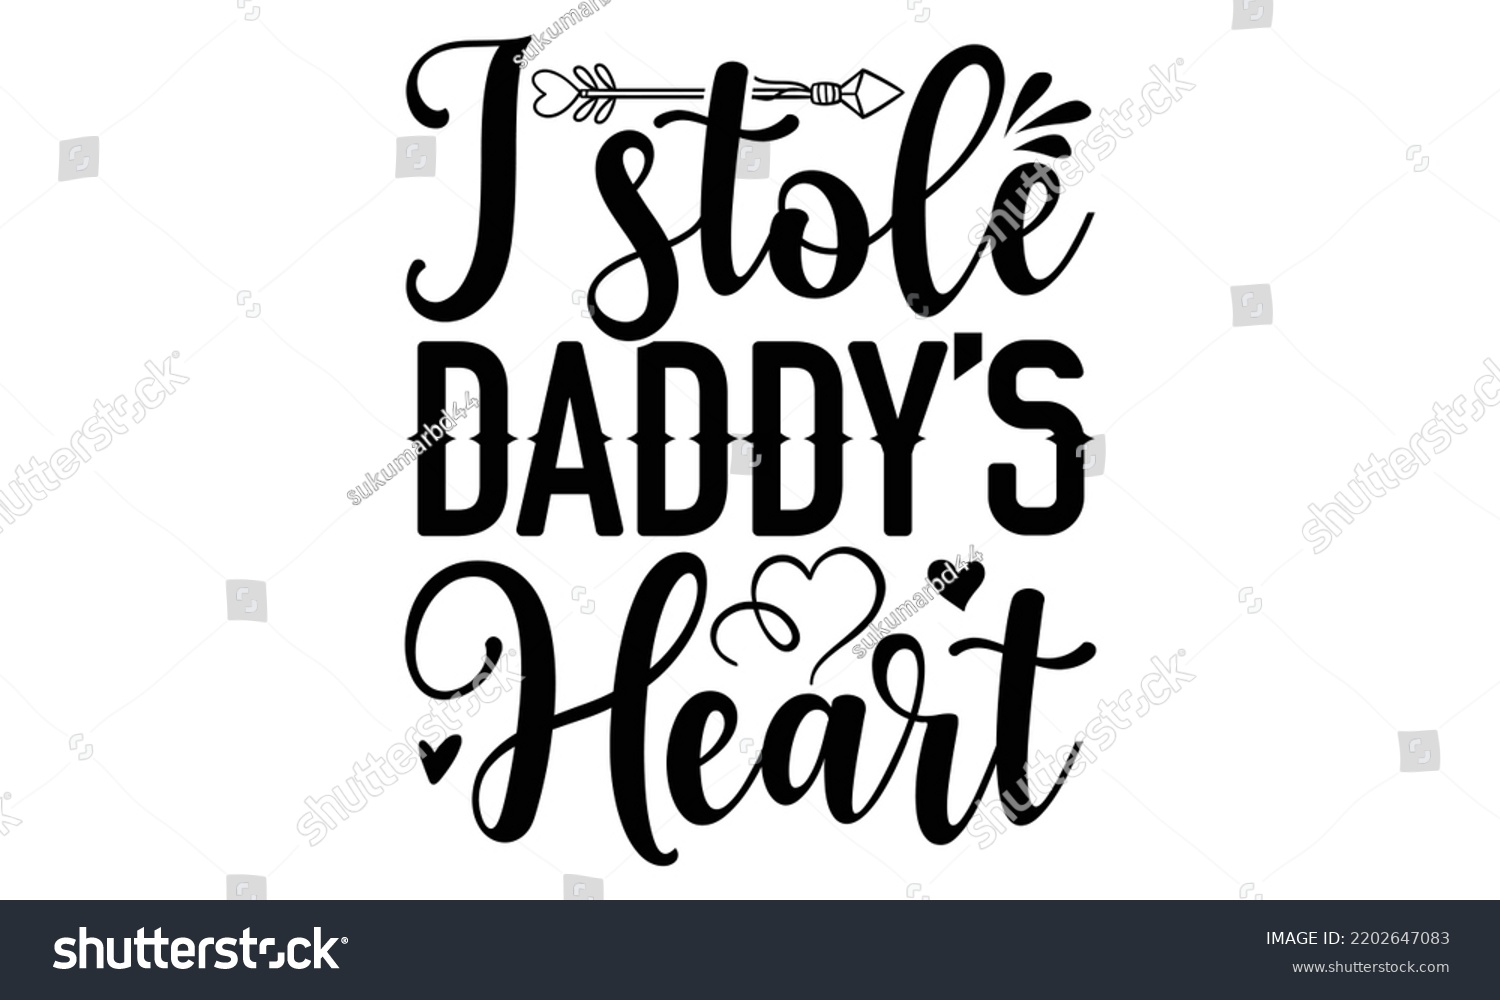 SVG of I Stole Daddy’s Heart - Valentine's Day 2023 quotes svg design, Hand drawn vintage hand lettering, This illustration can be used as a print on t-shirts and bags, stationary or as a poster. svg